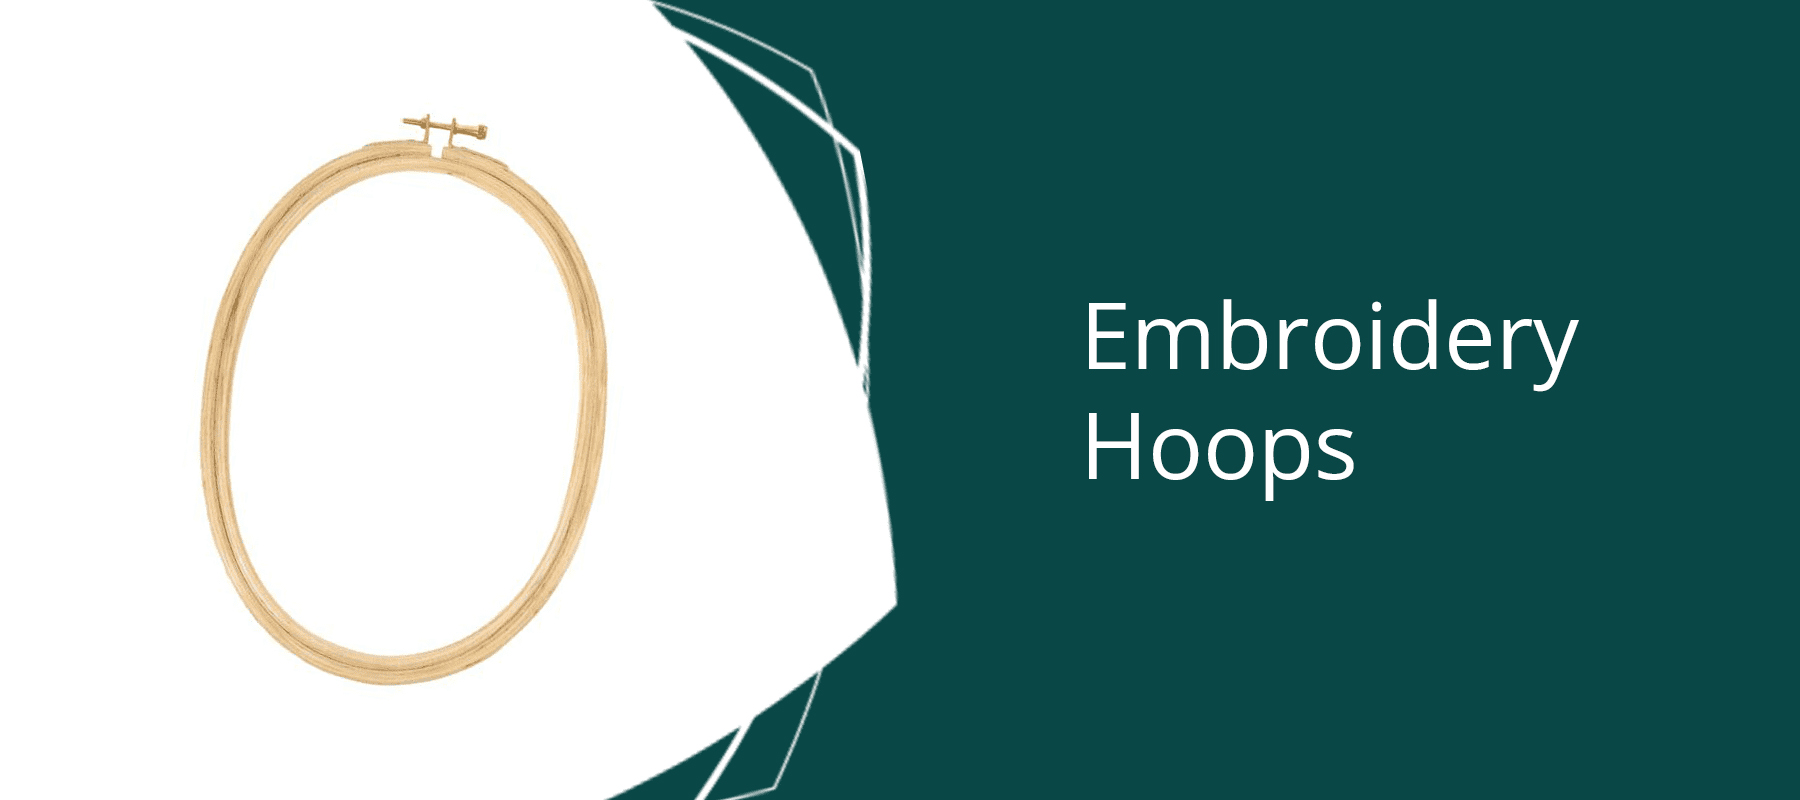 Embroidery Hoops: Cross Stitch, Needlework, and Embroidery - Thread Collective Australia 